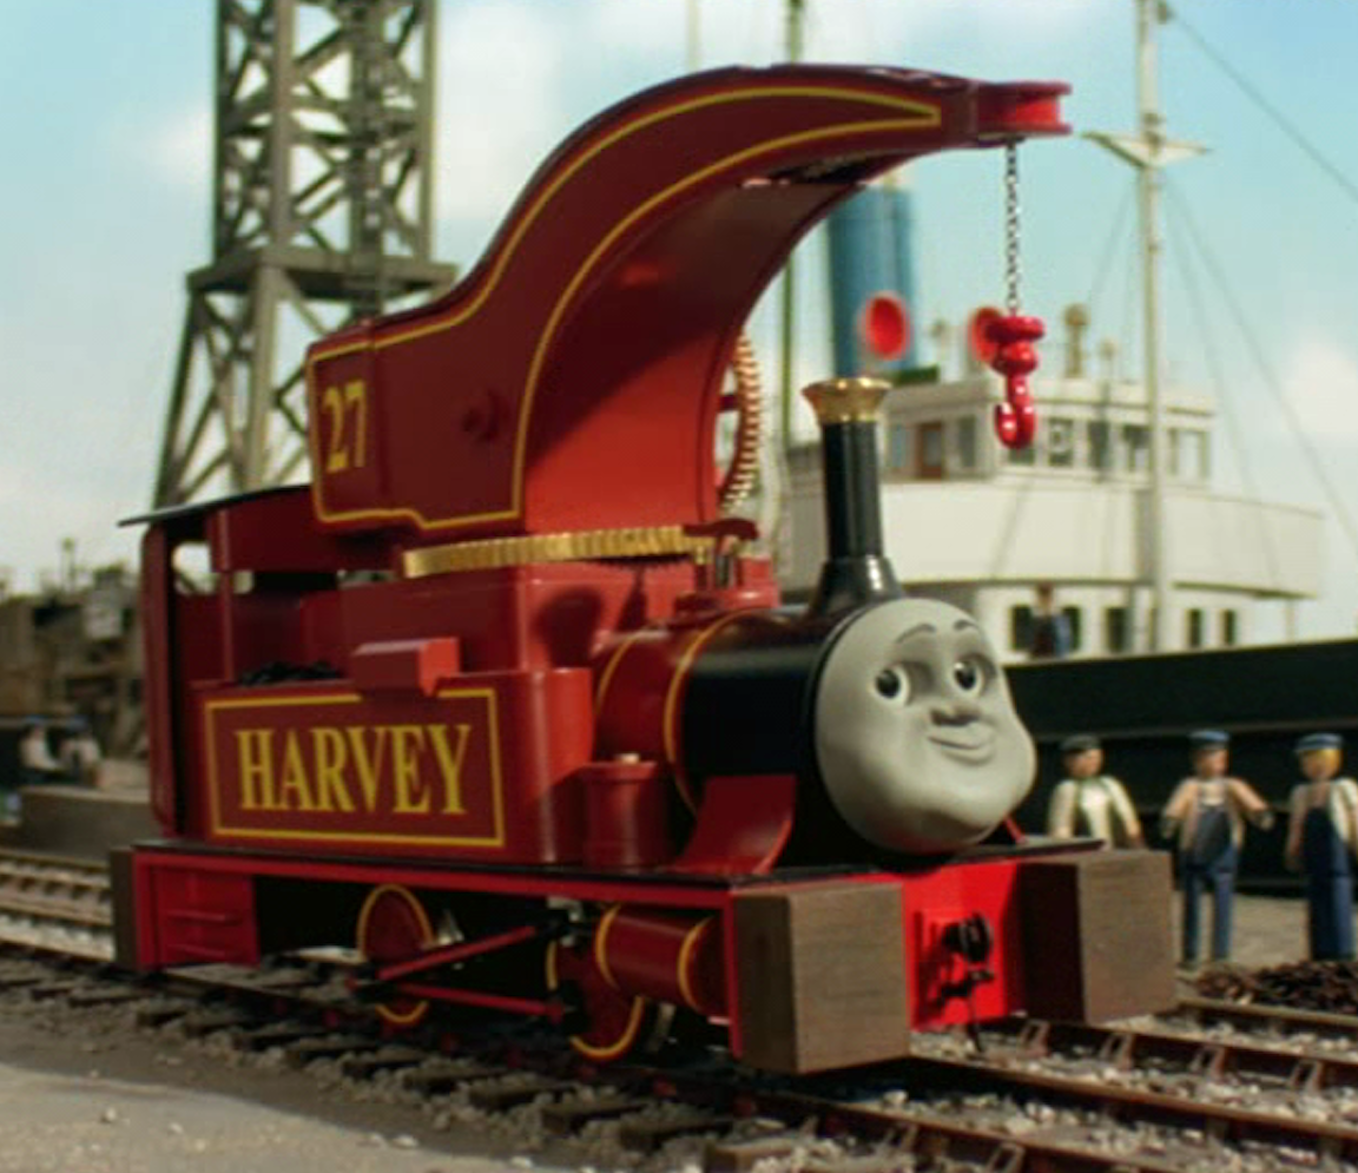 harvey from thomas and friends